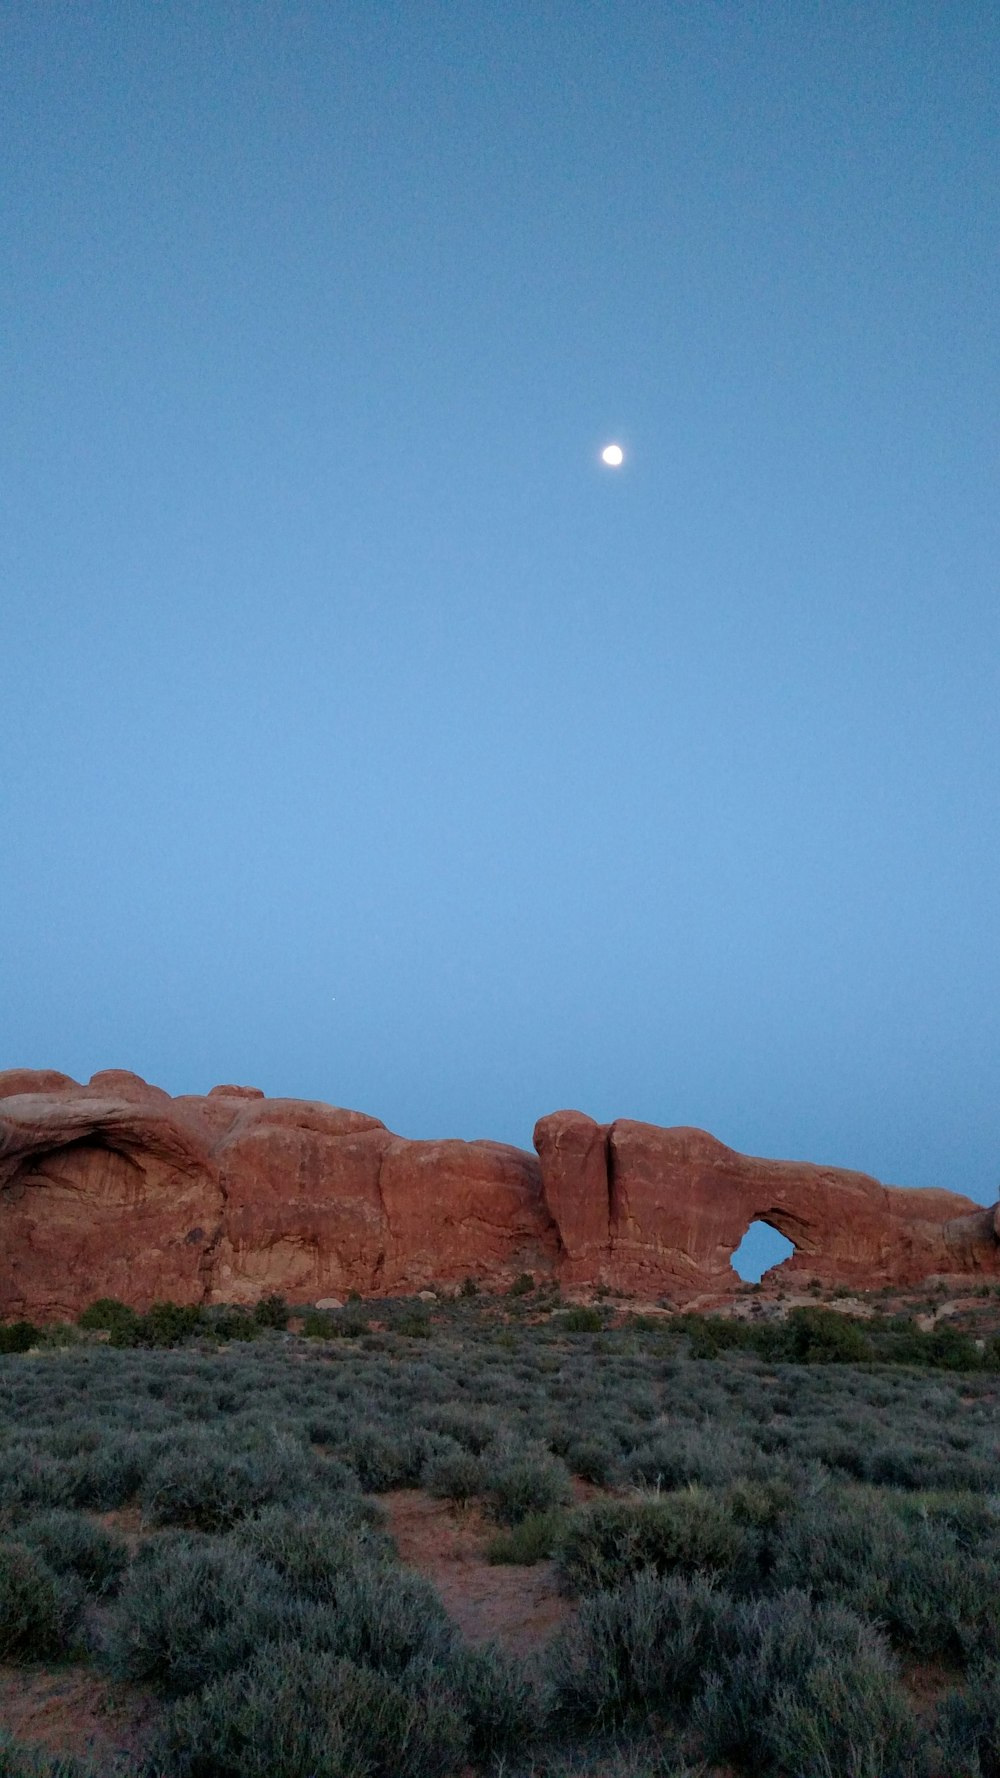 the moon is setting over a rock formation